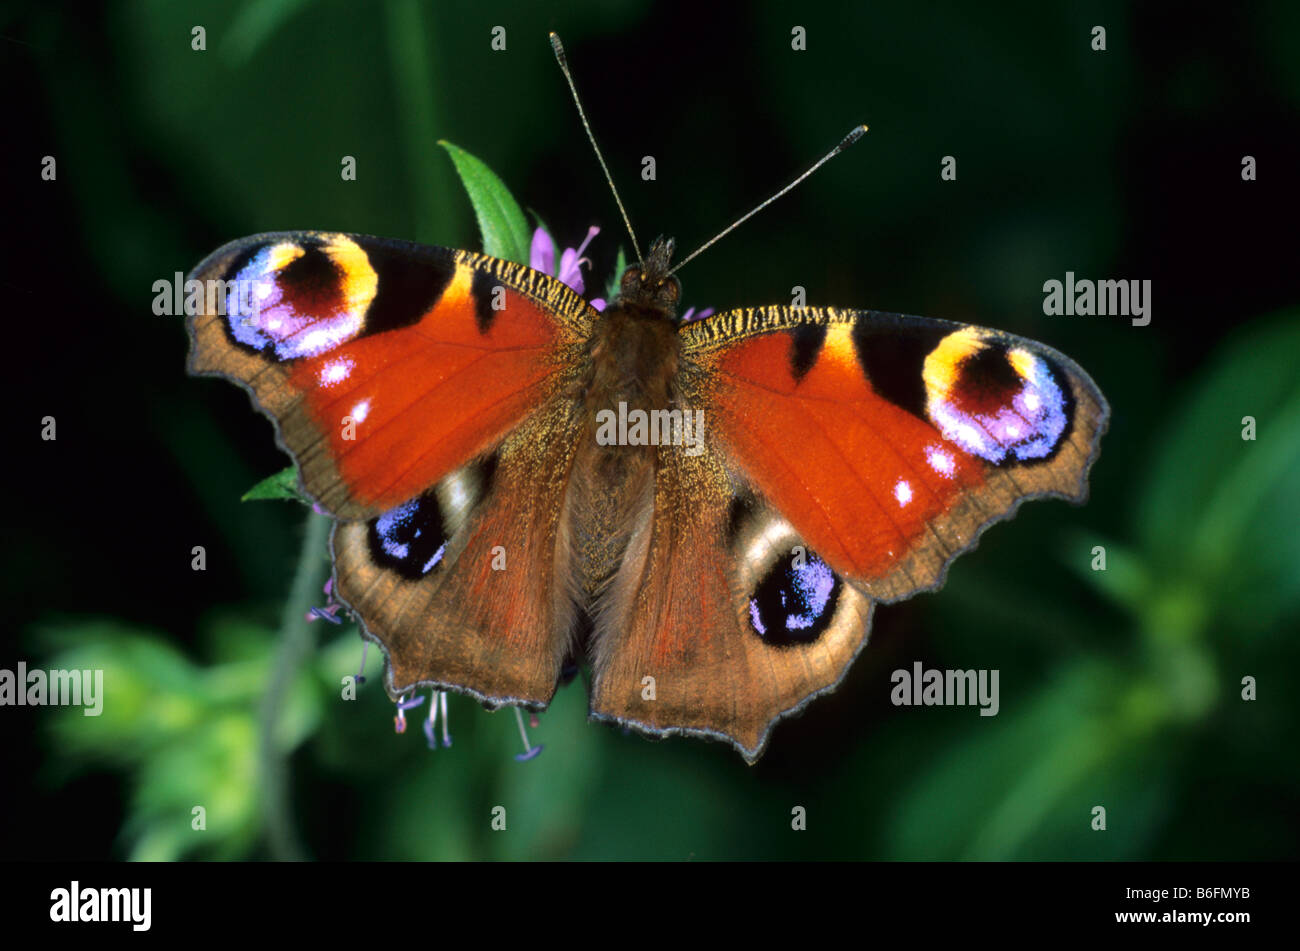 Peacock Butterfly (Inachis io) drinking nectar Stock Photo